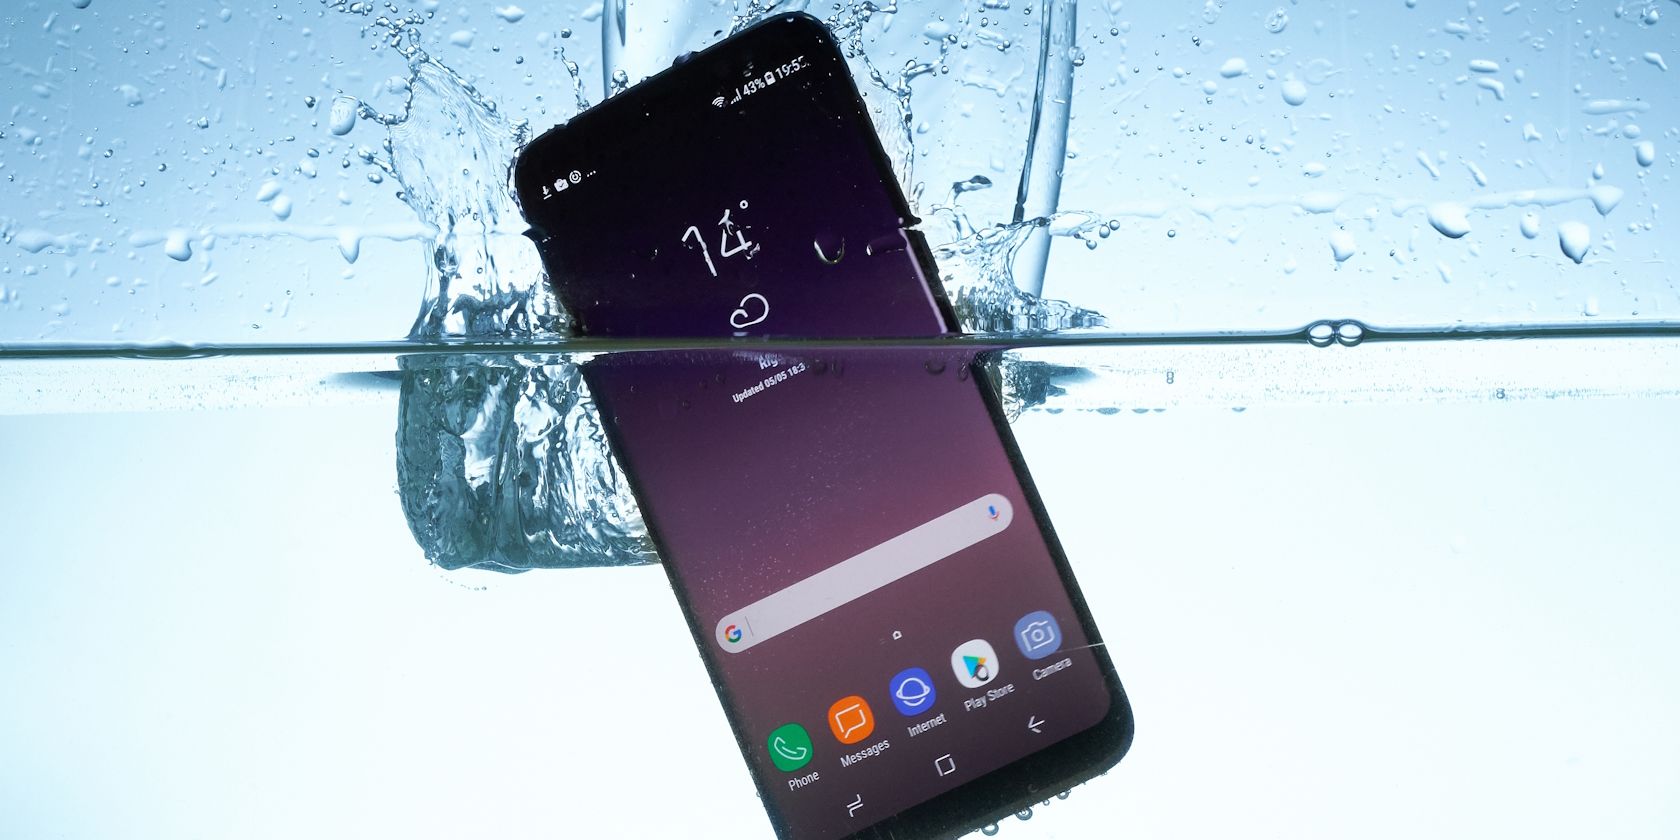 A Samsung Galaxy phone dropped in water